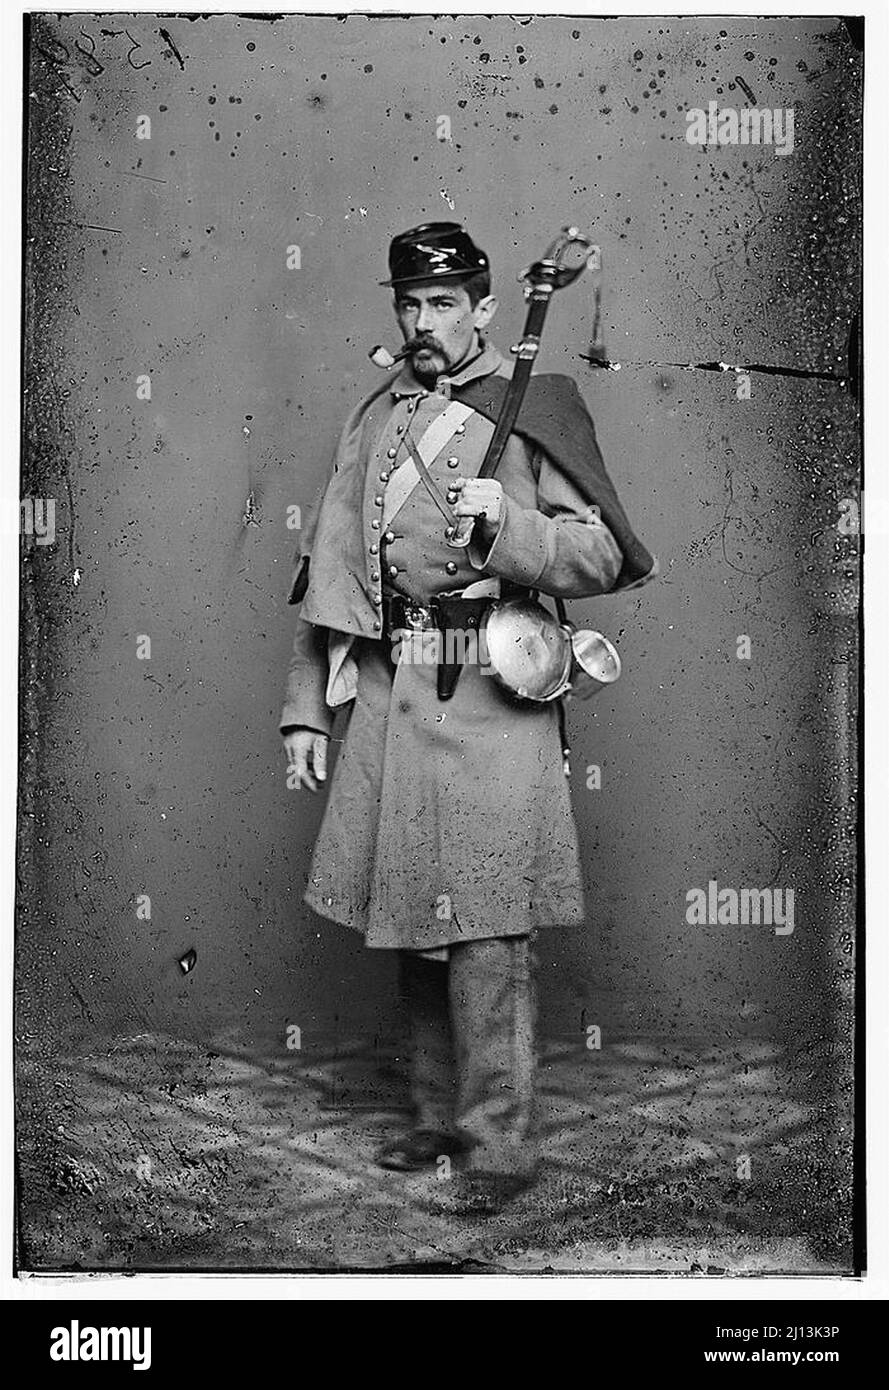 Vintage photo from the American Civil War 1860s Stock Photo